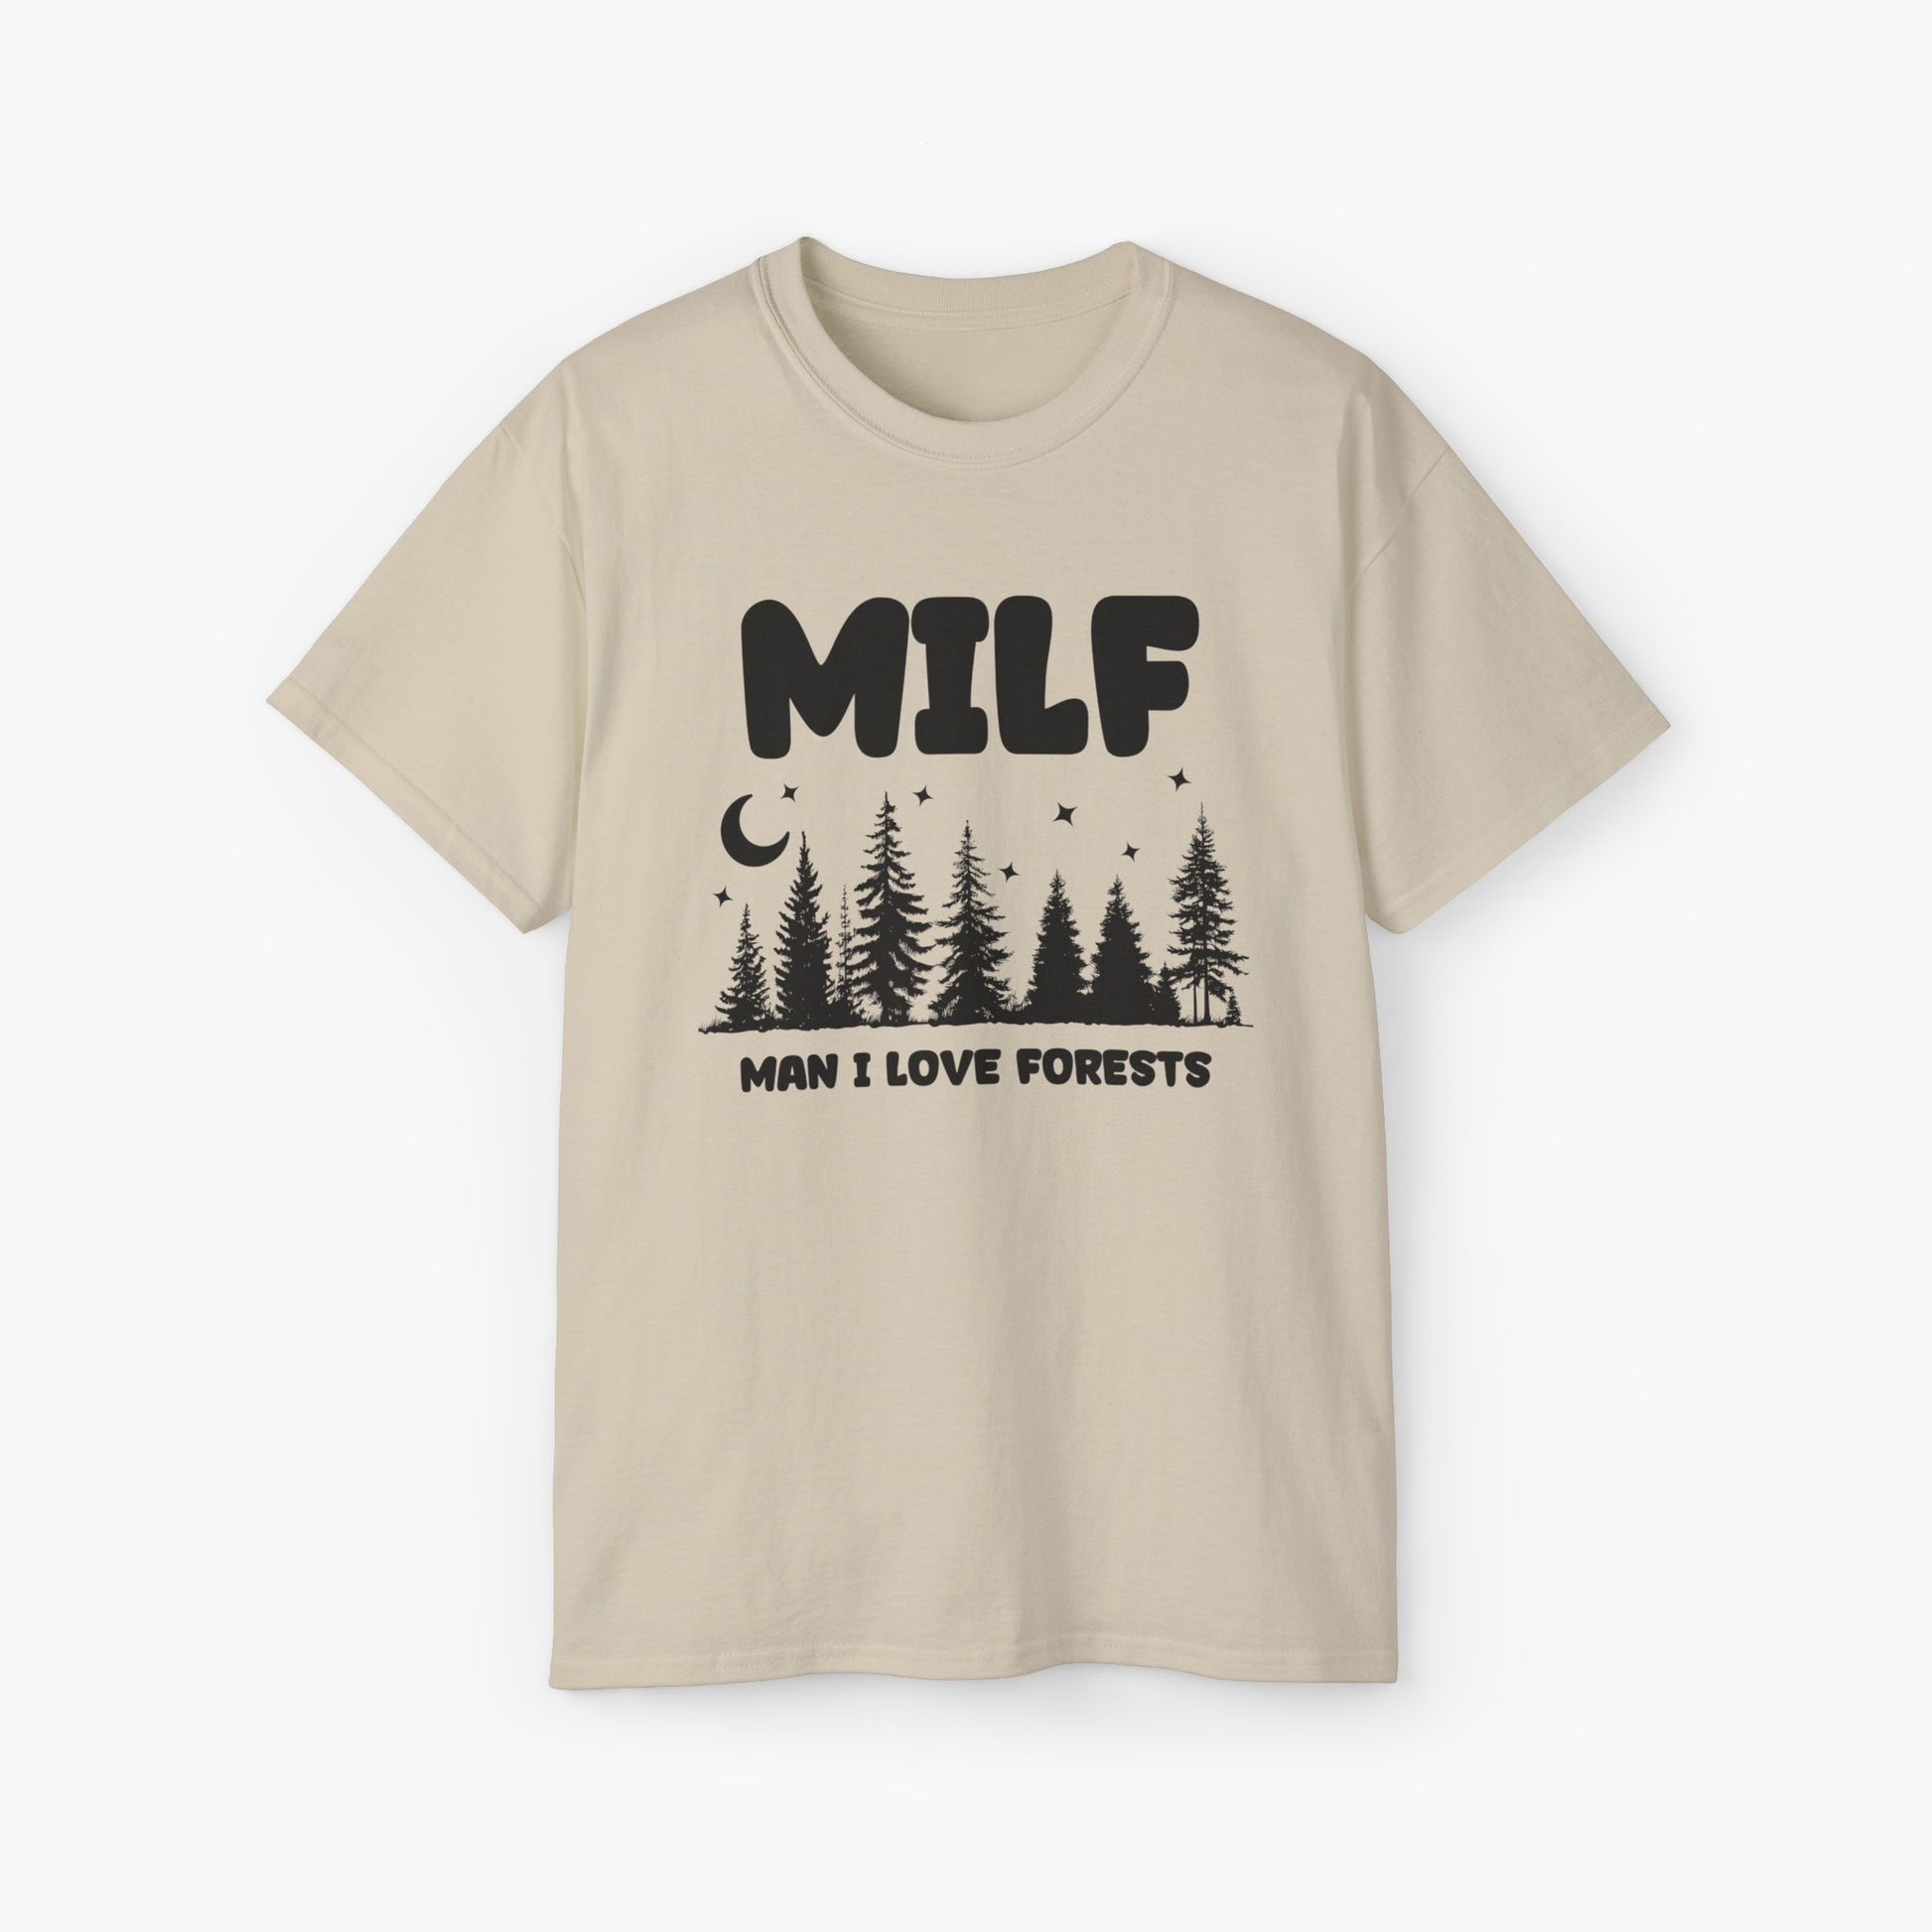 Sand colored t-shirt with the text 'MILF, Man I Love Forests,' featuring trees, stars, and a moon on a plain background.